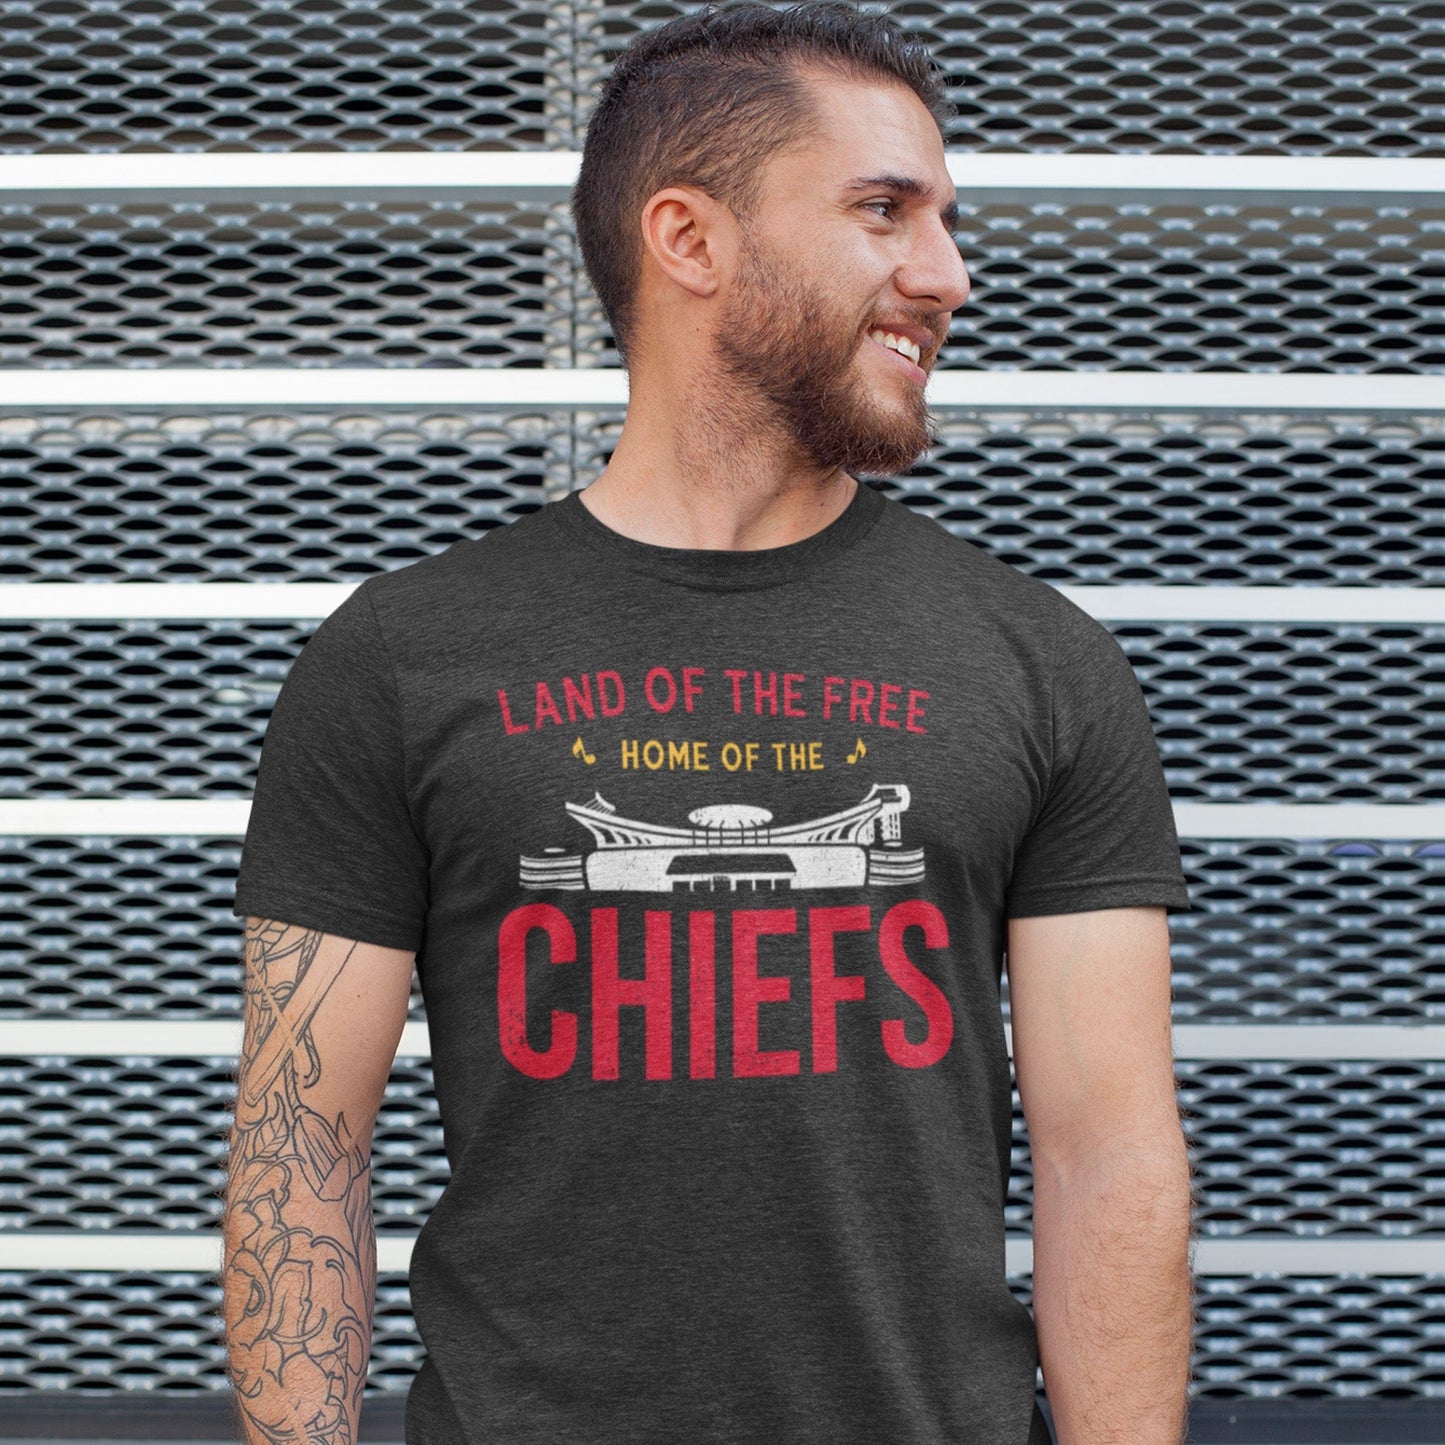 KC Swag | Kansas City Chiefs white & red HOME OF THE CHIEFS on dark heather gray unisex t-shirt worn by male model staning in front of a large metal grate wall